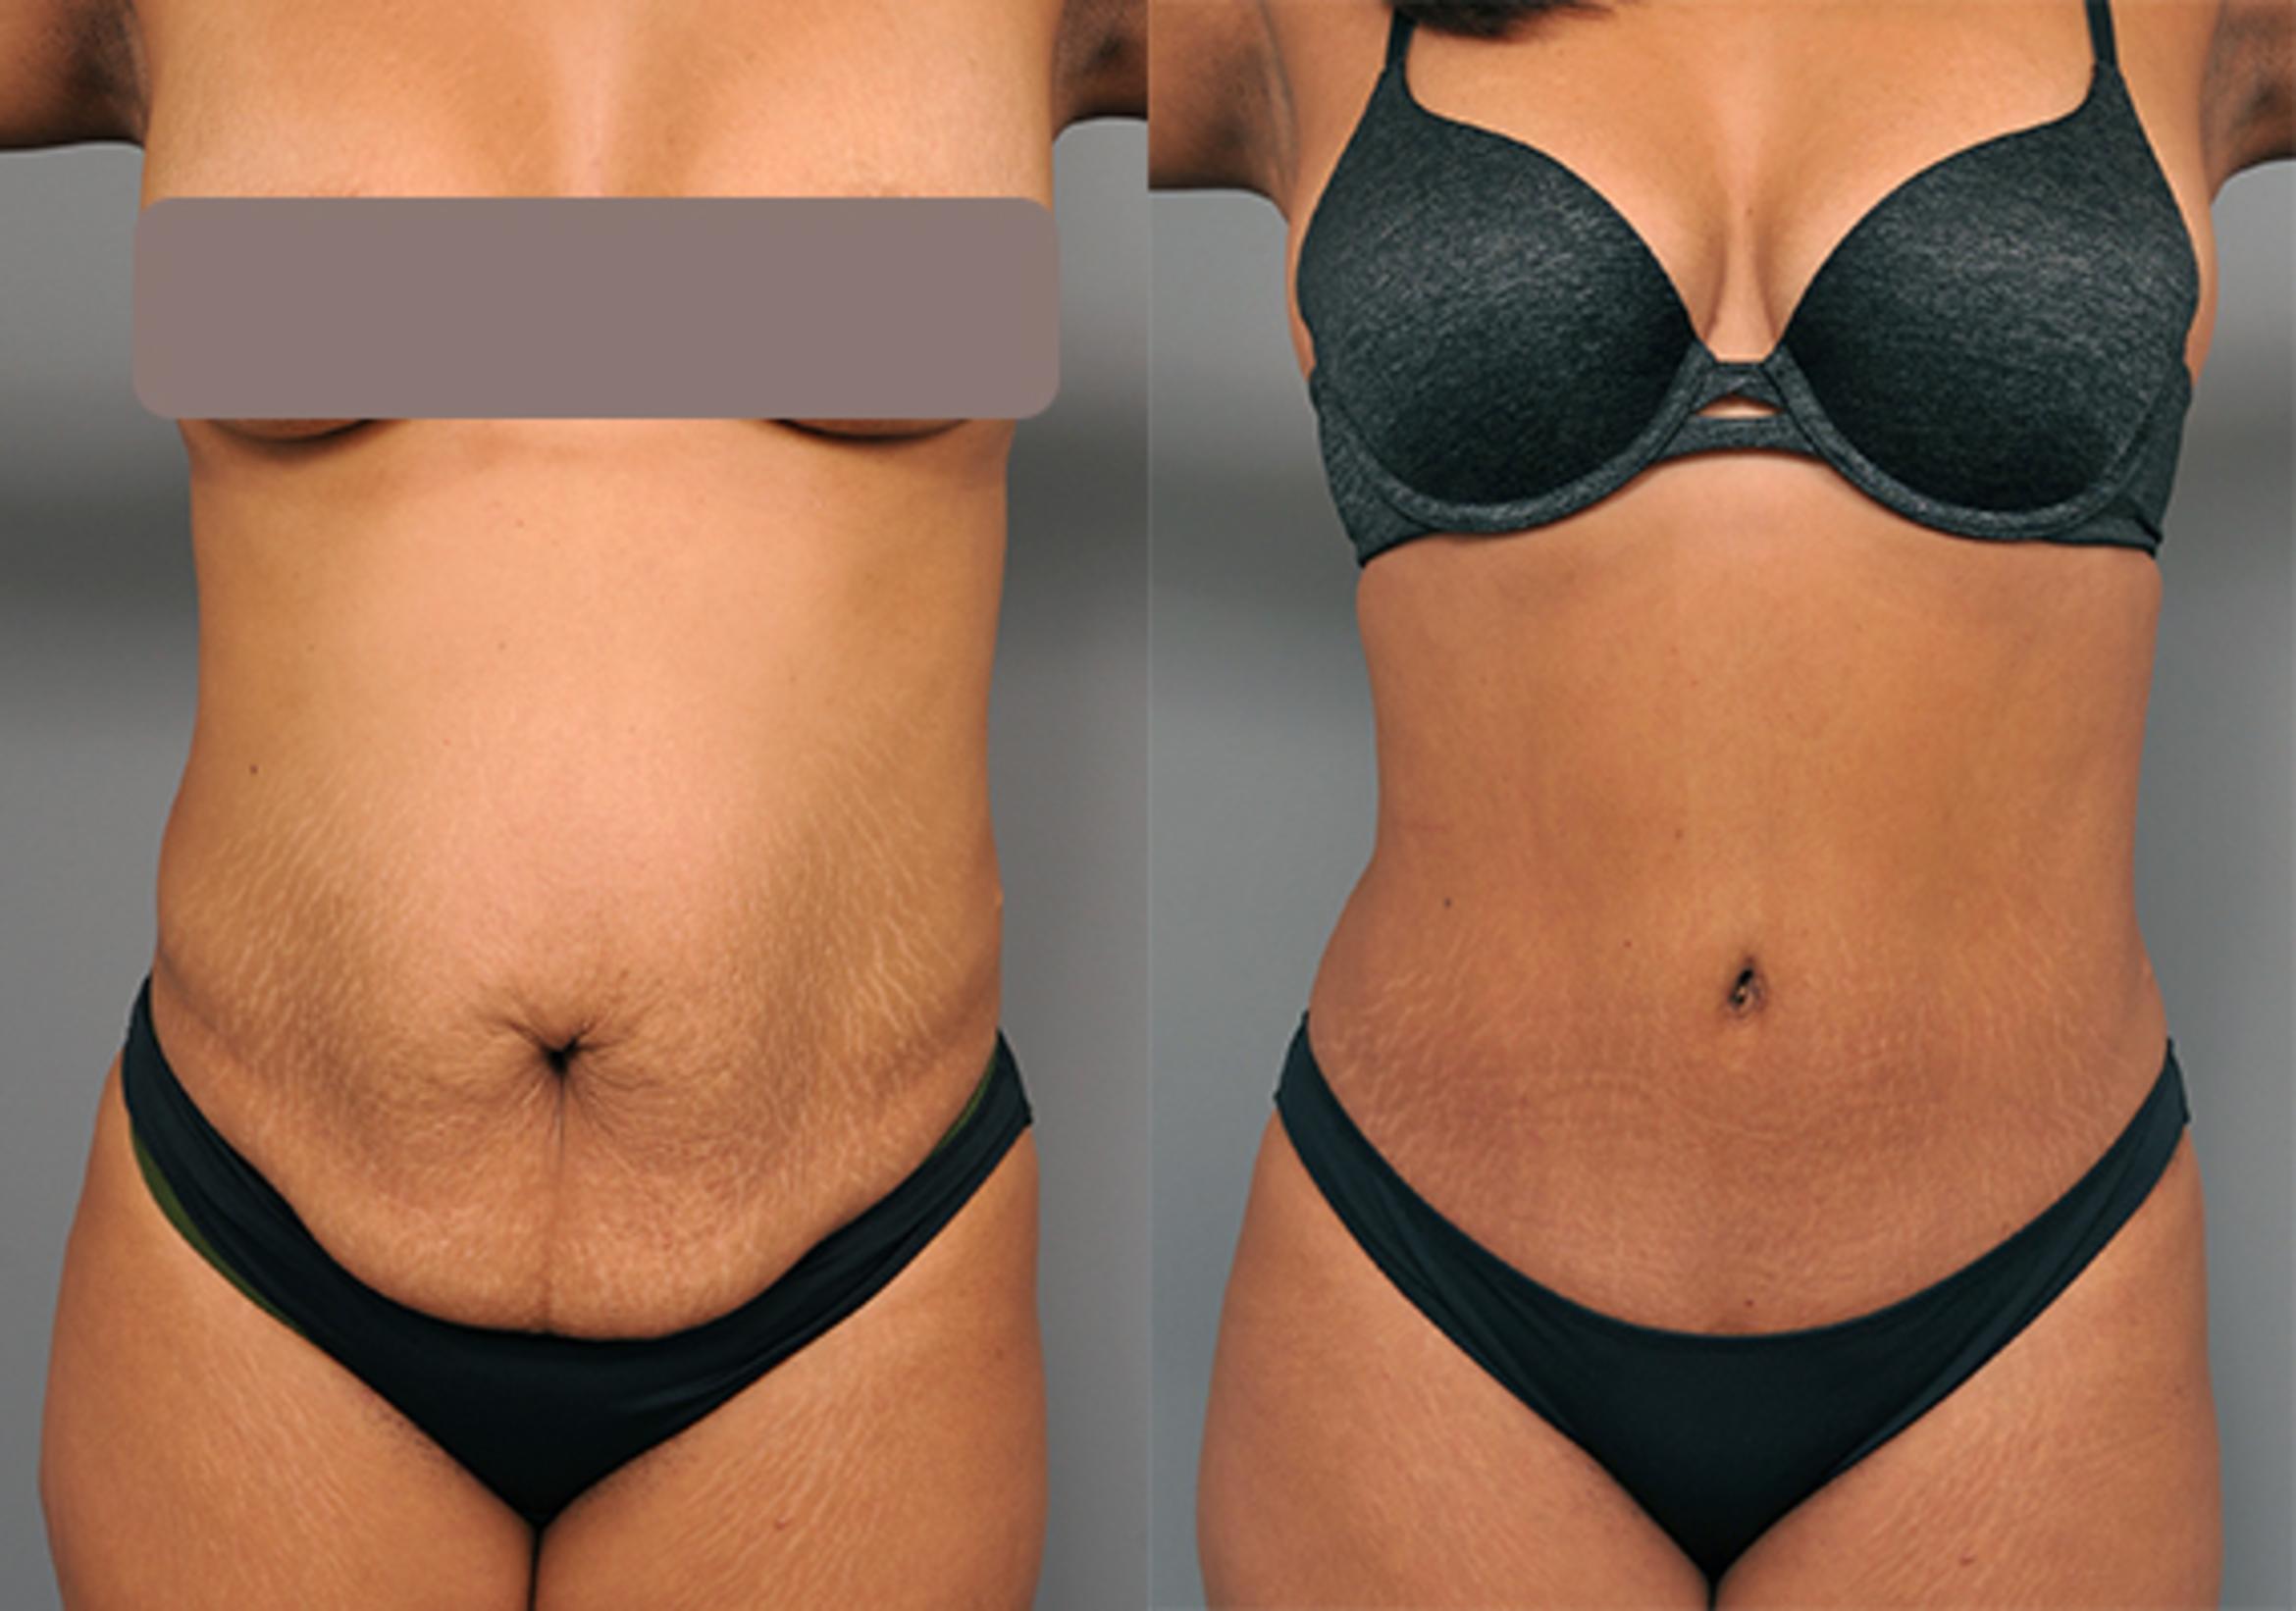 Should you add liposuction to your tummy tuck?